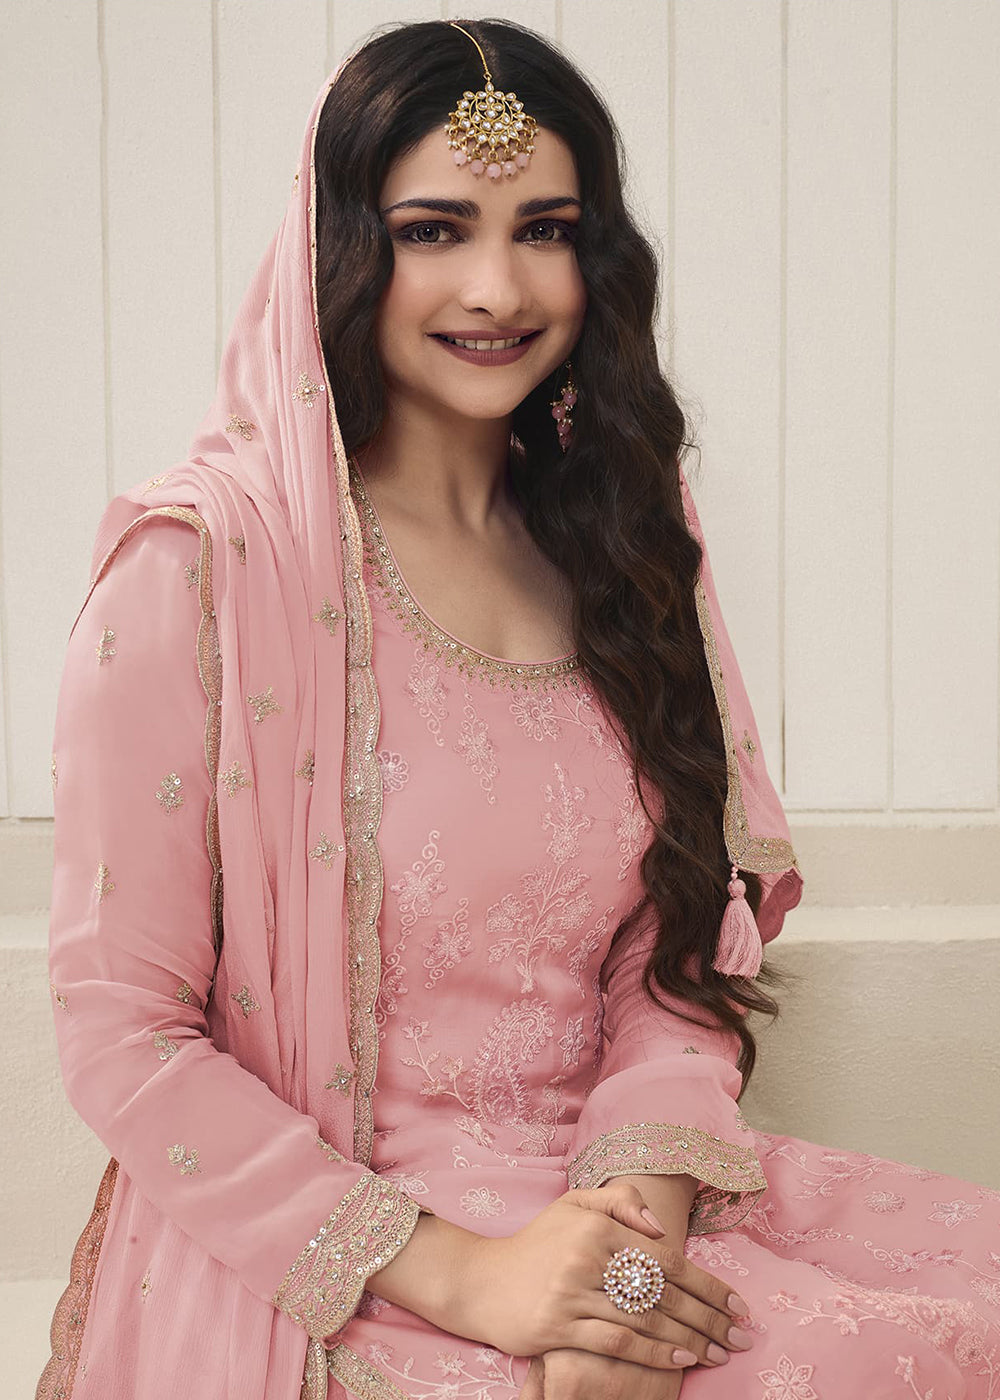 Shop Now Prachi Desai Soft Pink Organza Embroidered Sharara Suit Online at Empress Clothing in USA, UK, Canada, Italy & Worldwide.